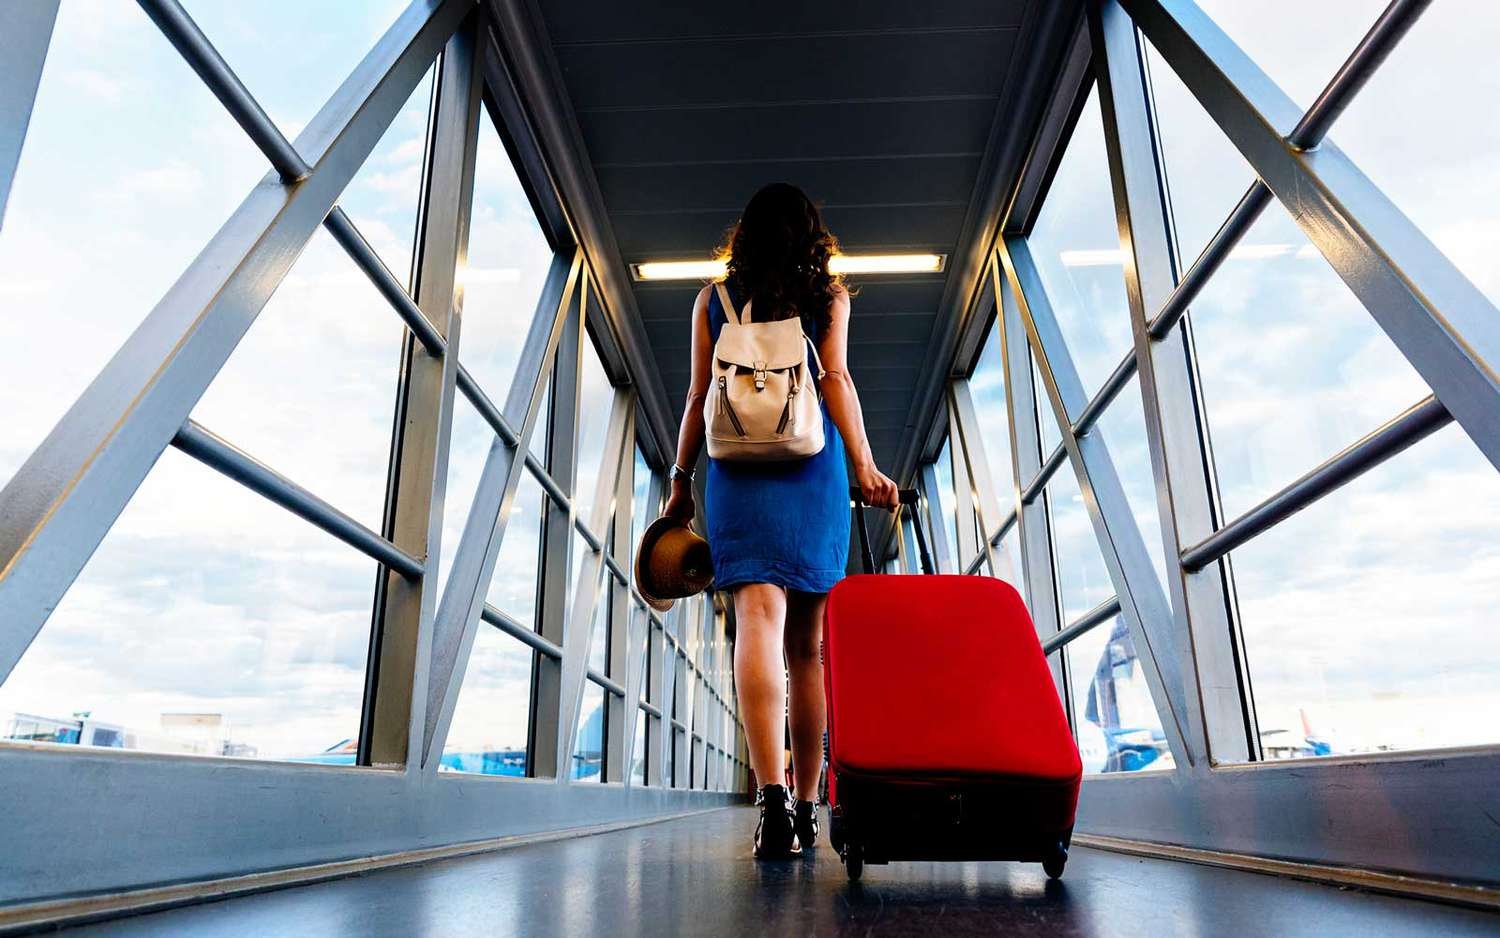 25 Things You Should Do Before Boarding a Plane, According to a Frequent Flier